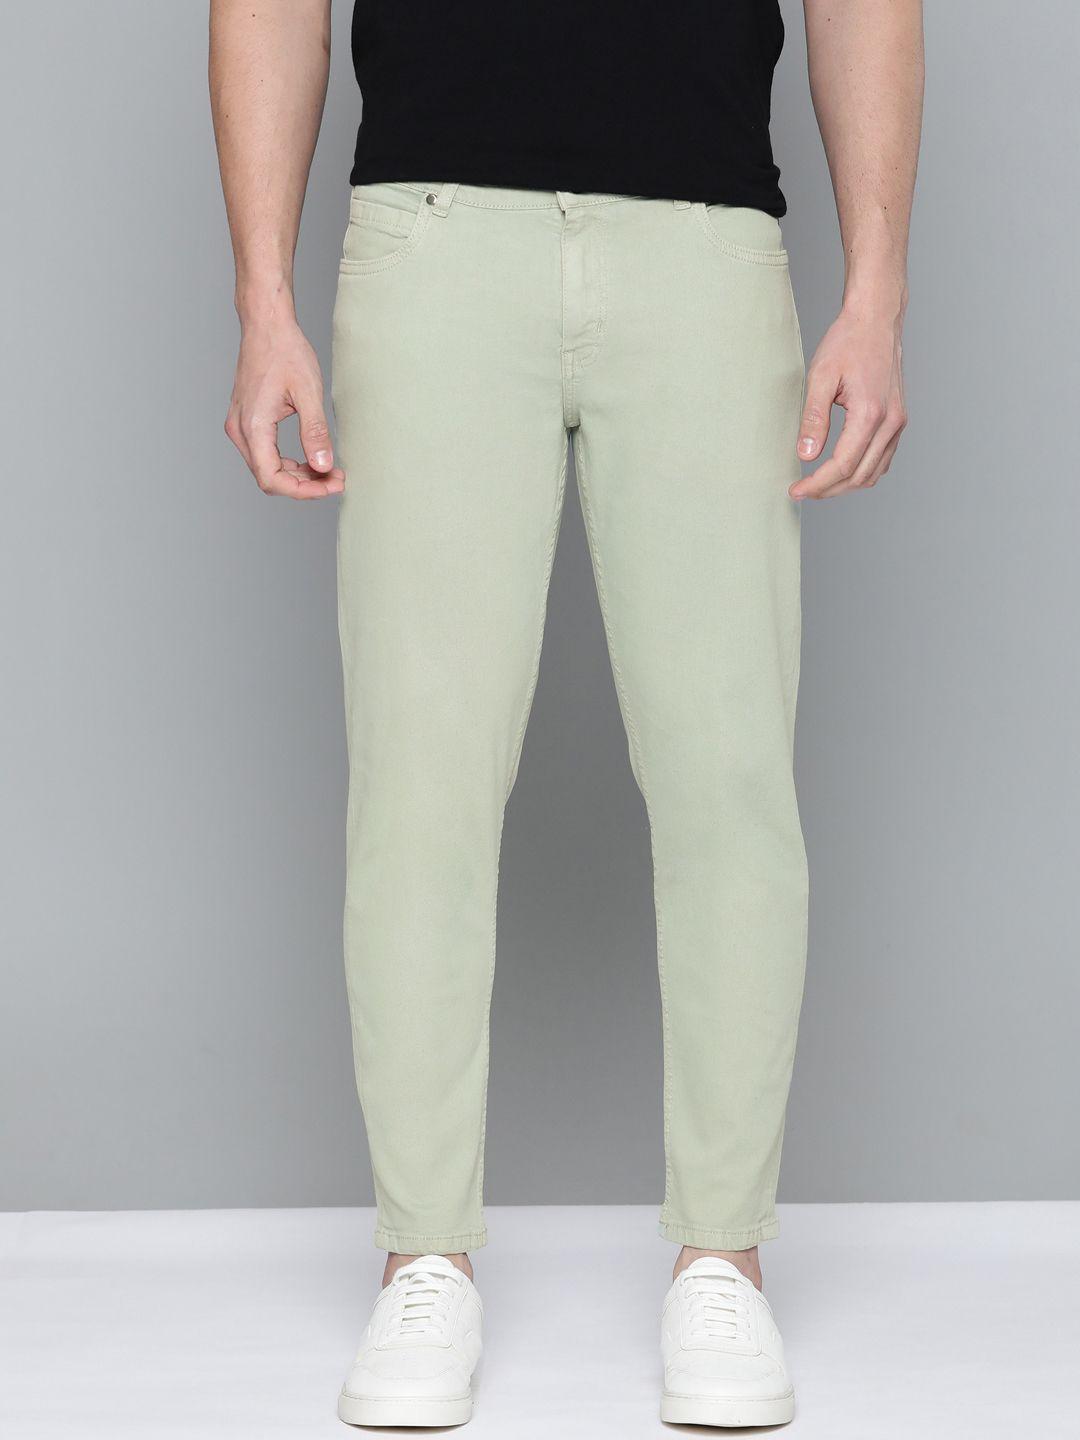 mast & harbour men green carrot fit stretchable jeans